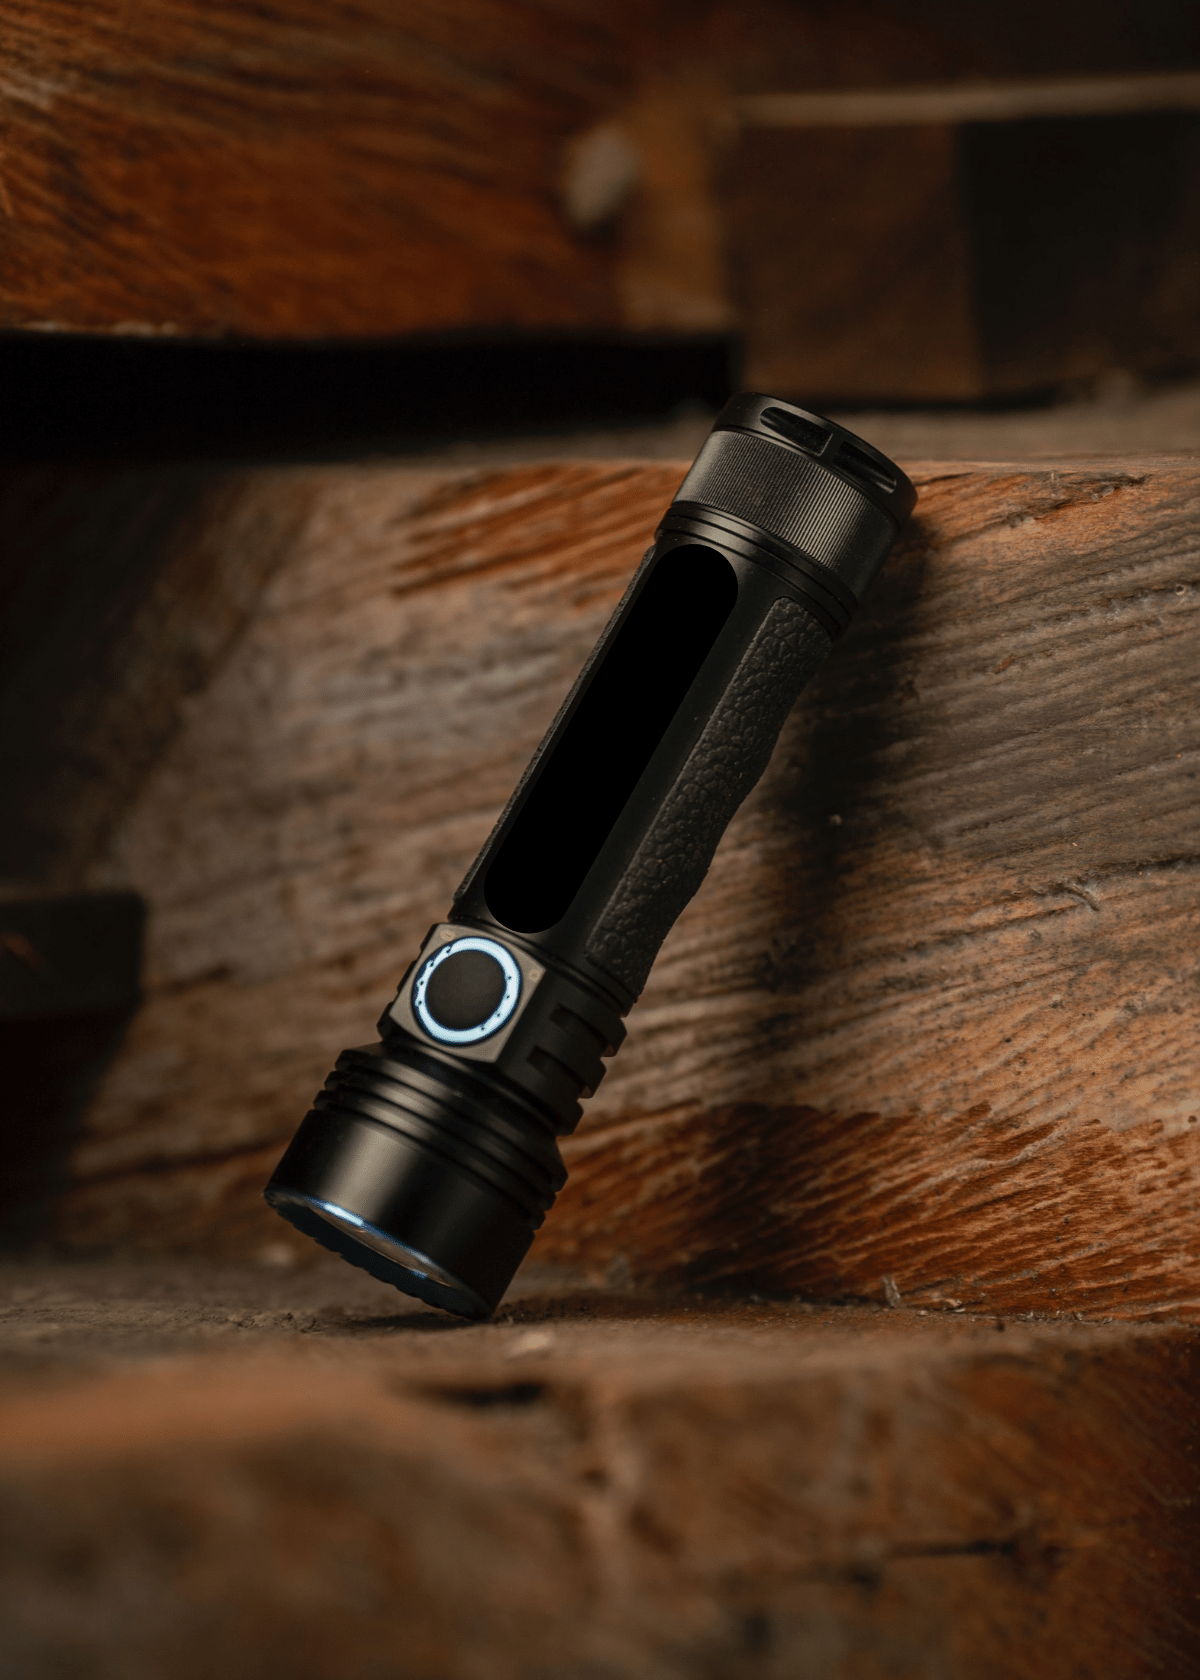 Batteries Included: Why Is My Rechargeable Flashlight Not Charging?